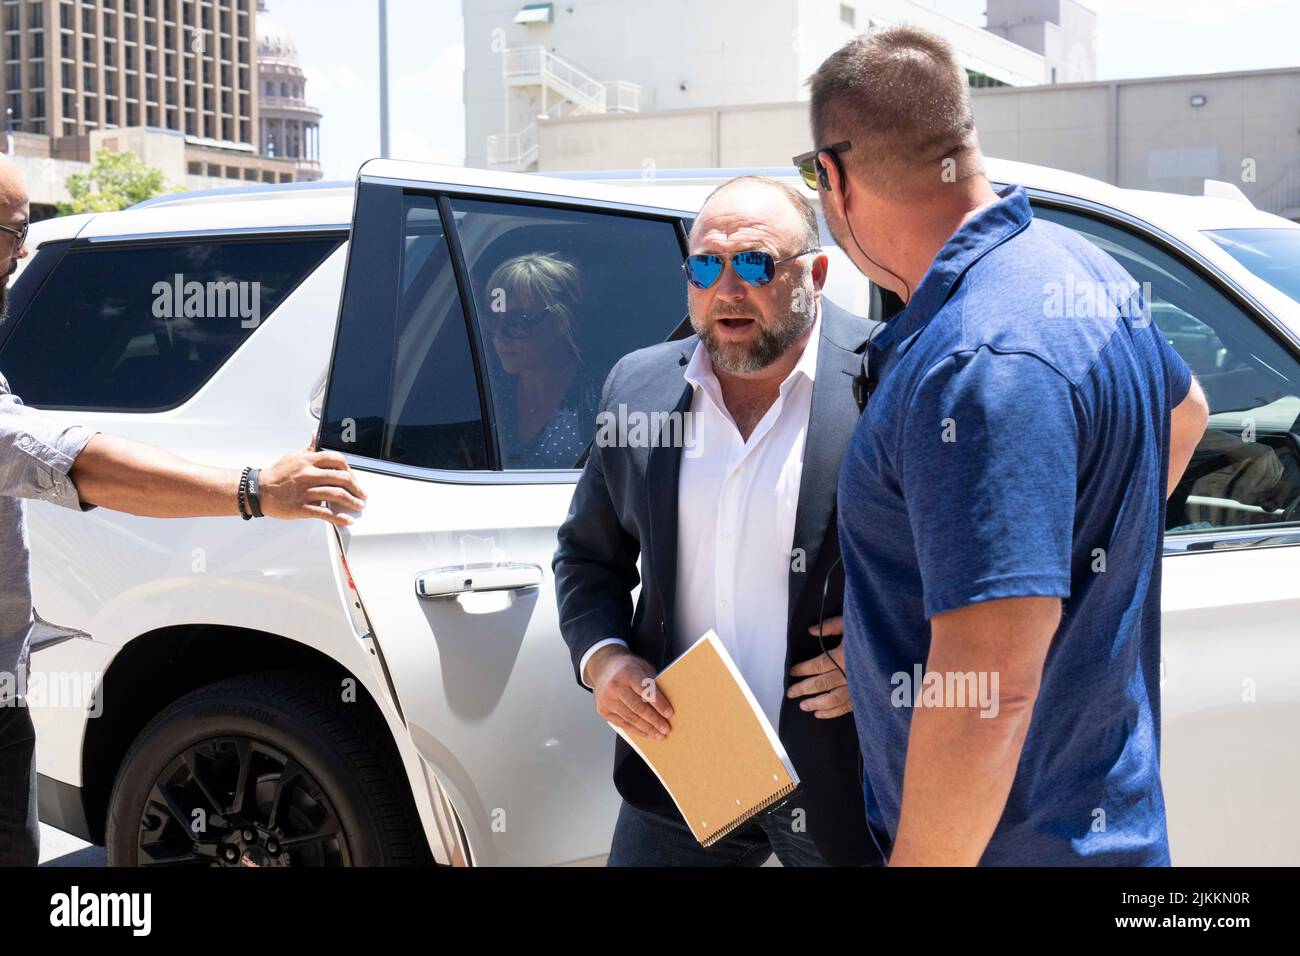 Austin, United States. 02nd Aug, 2022. Austin, United States. 2nd Aug, 2022. Flanked by several bodyguards, InfoWars head ALEX JONES arrives at the Travis County Courthouse for afternoon testimony in his defamation trial in Day 6 on August 2, 2022. Jones has been found guilty for defaming families in the 2012 Sandy Hook school massacre. The jury is to decide whether to award up to $150 million to Sandy Hook families. Credit: Bob Daemmrich/Alamy Live News Stock Photo